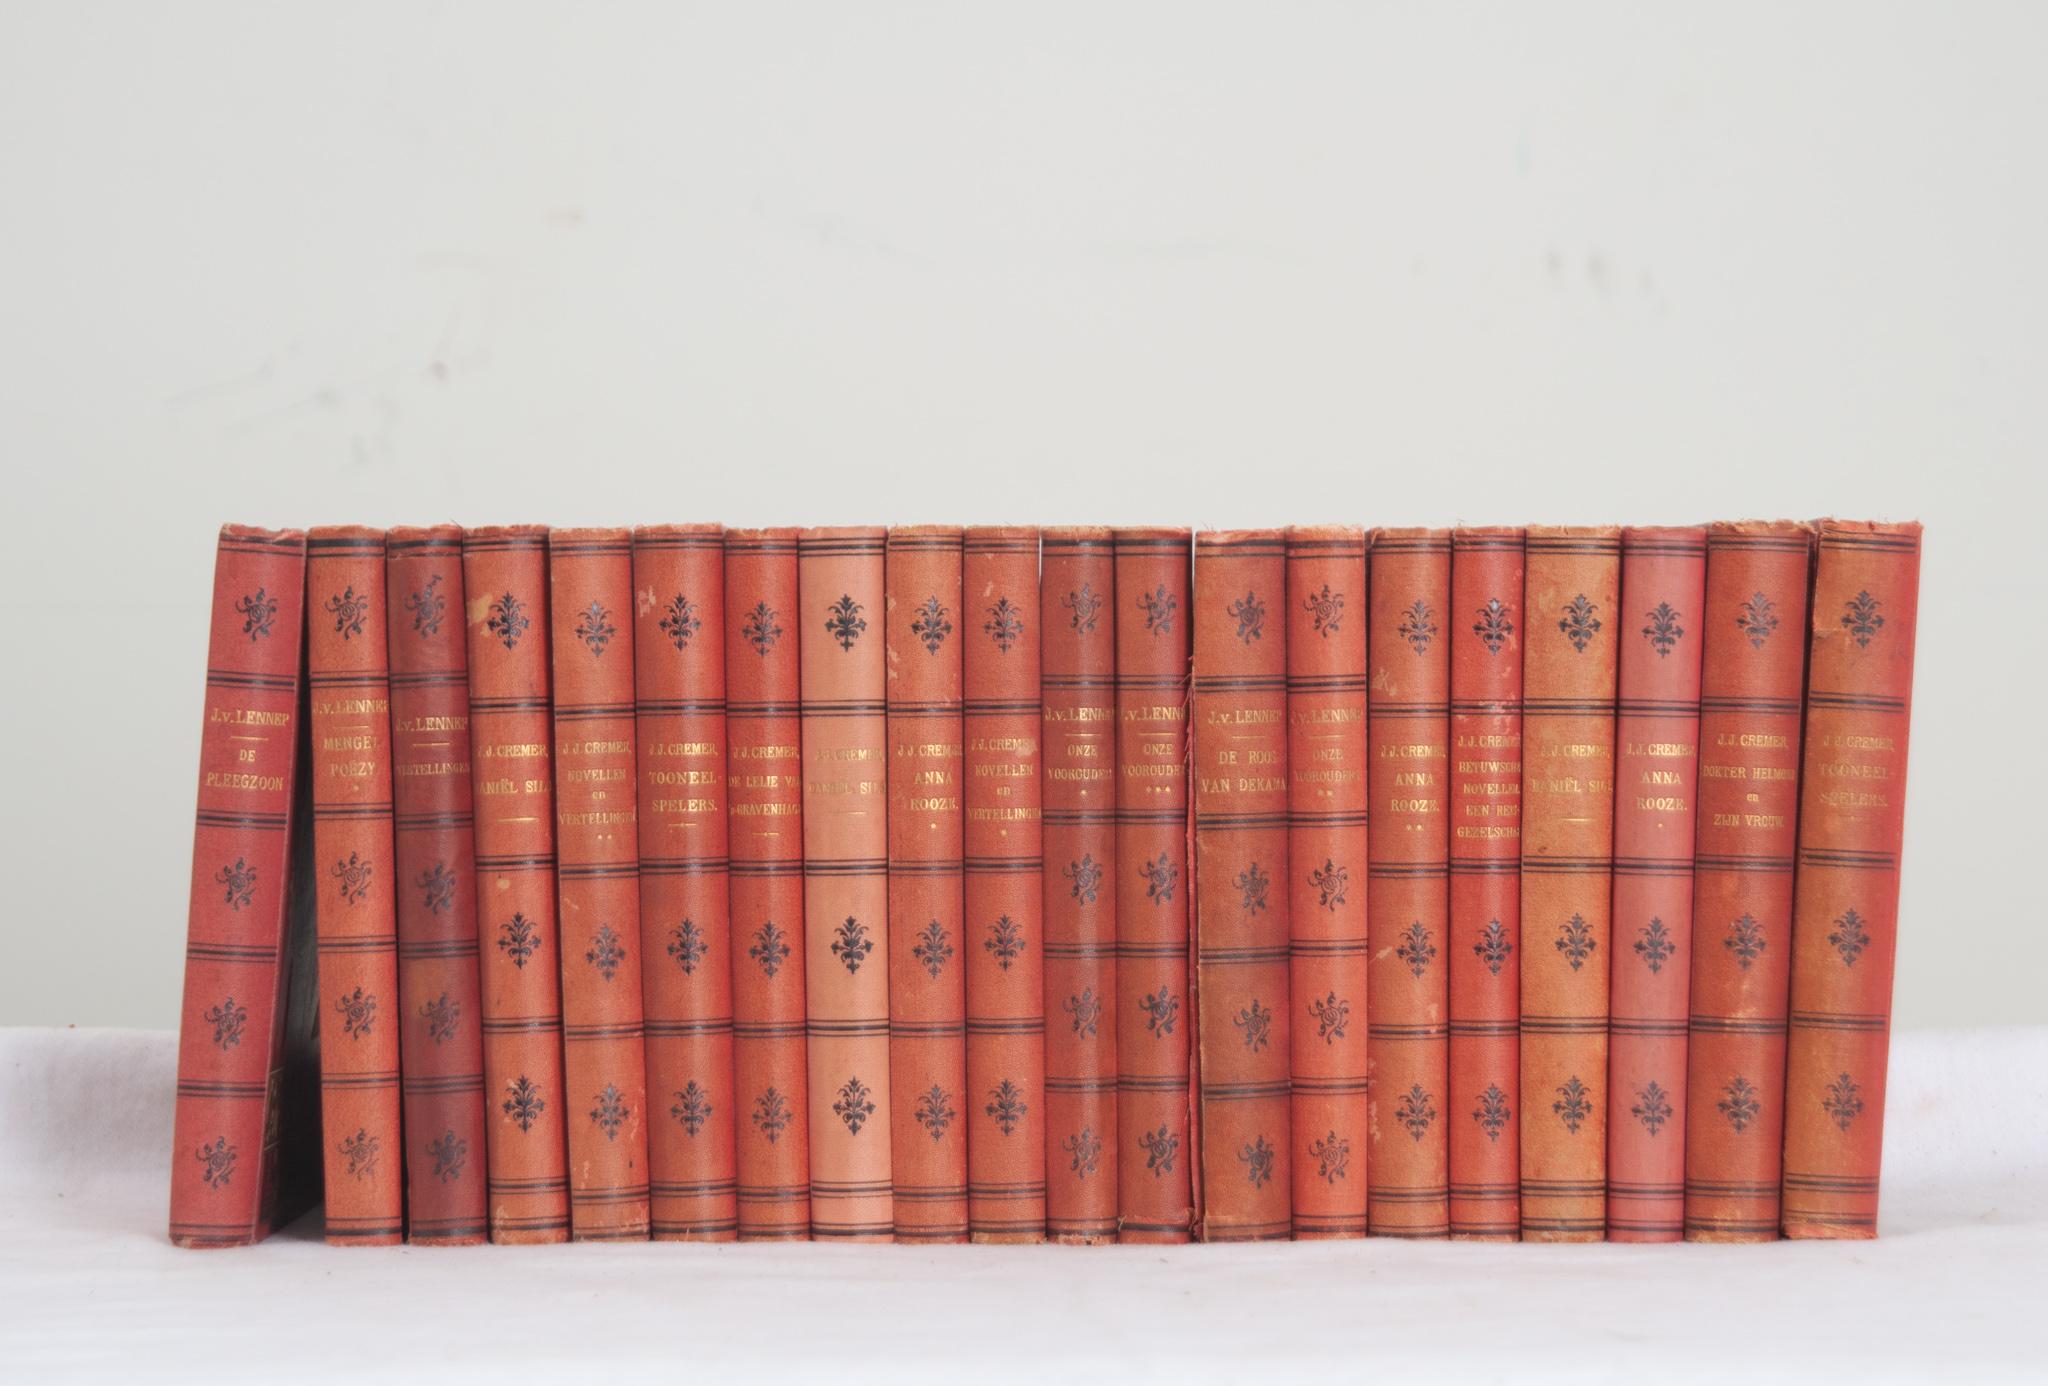 A collection of  twenty volumes of works by Dutch novelists J. Van Lennep and J. J. Cremer. This set of books is bound in pressed fabric with gold lettering. There are minor signs of wear, make sure to view the detailed images for the current